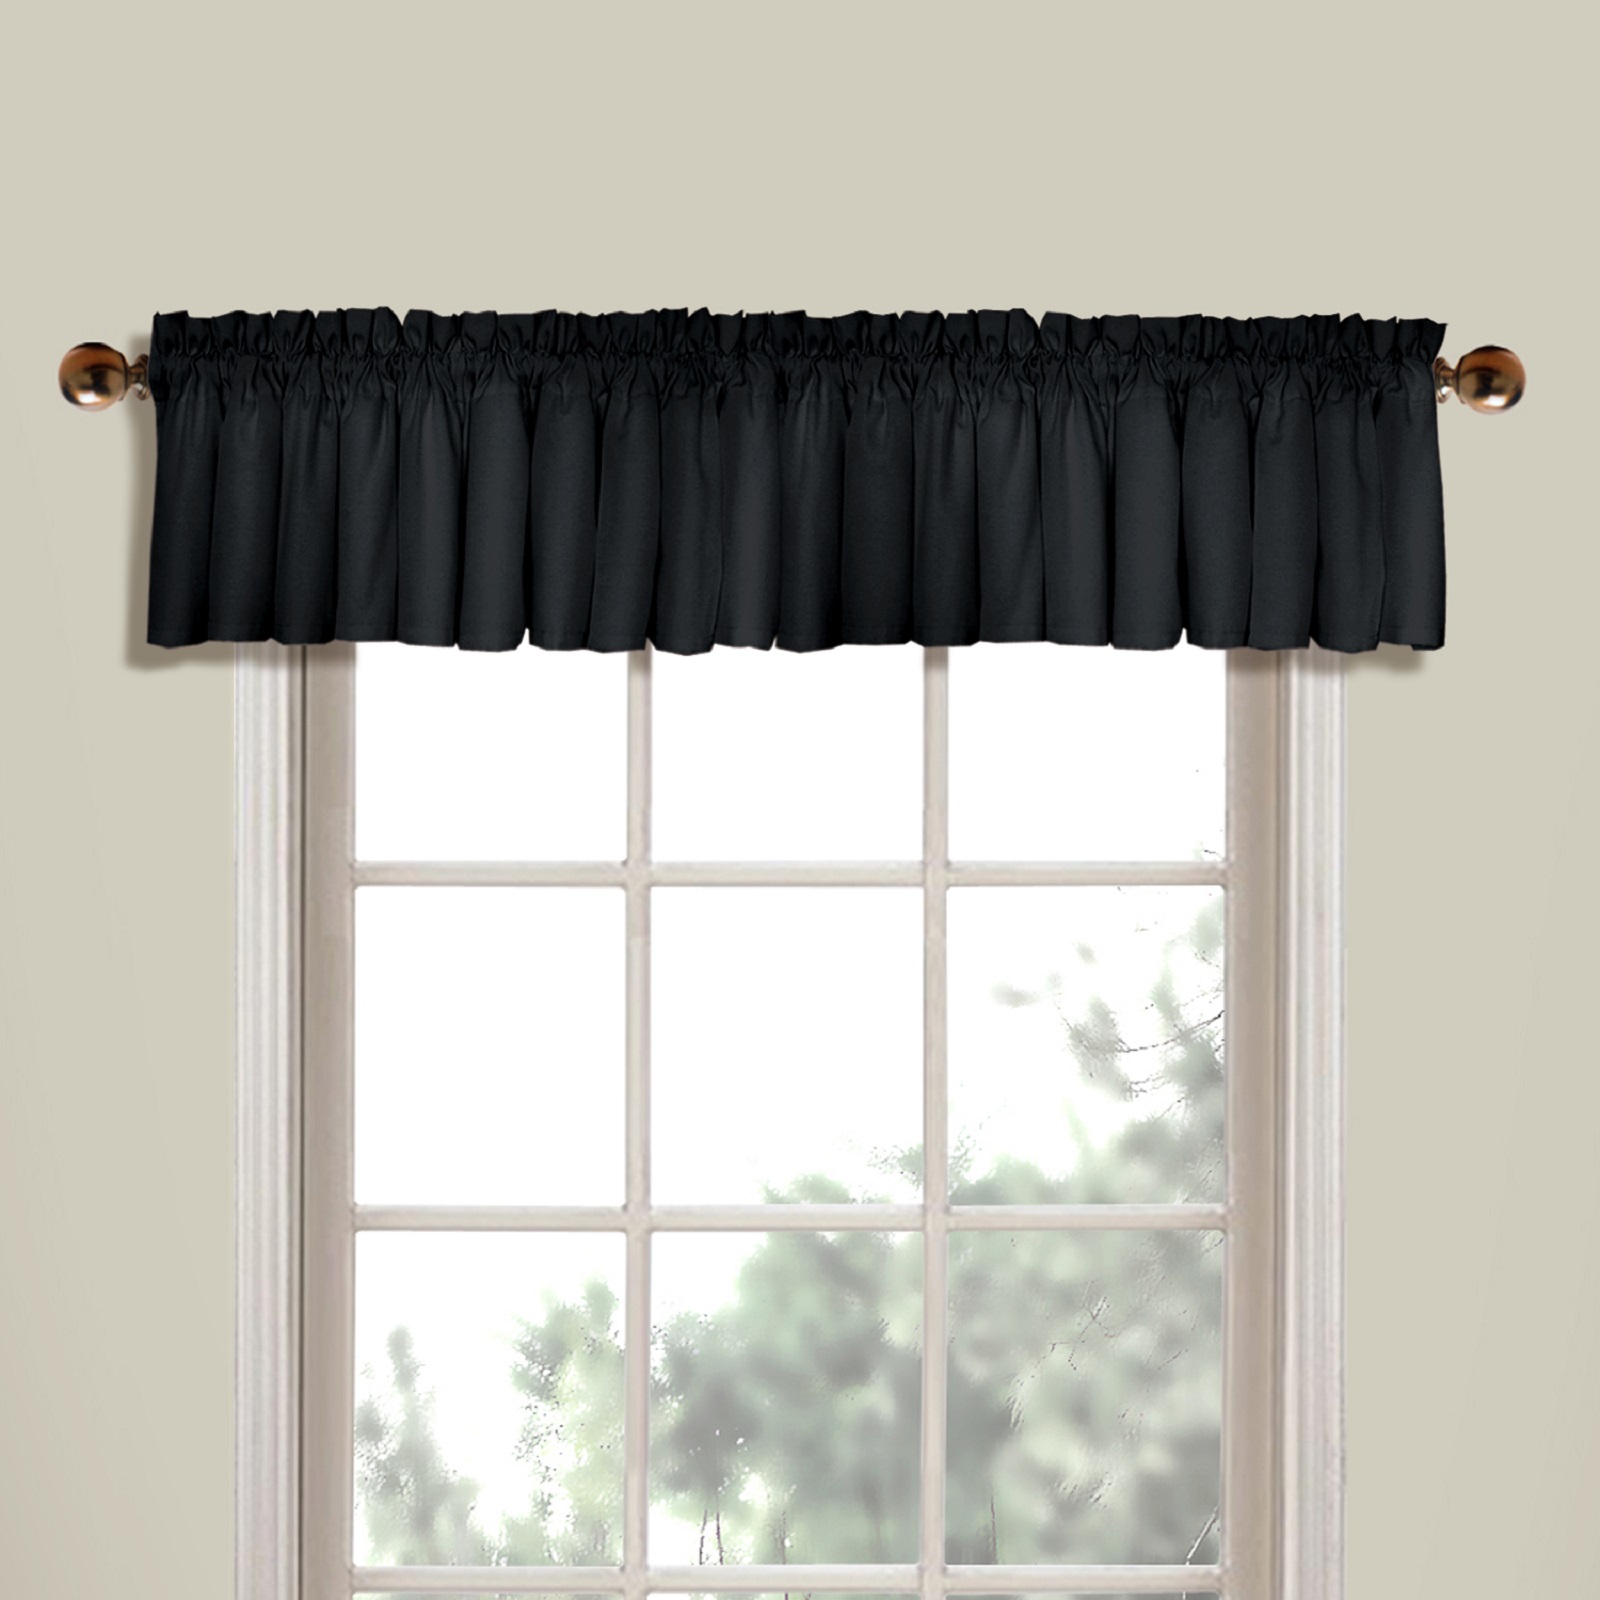 United Curtain Company Westwood 56" x 16" valance available in black, navy, burgundy and natural